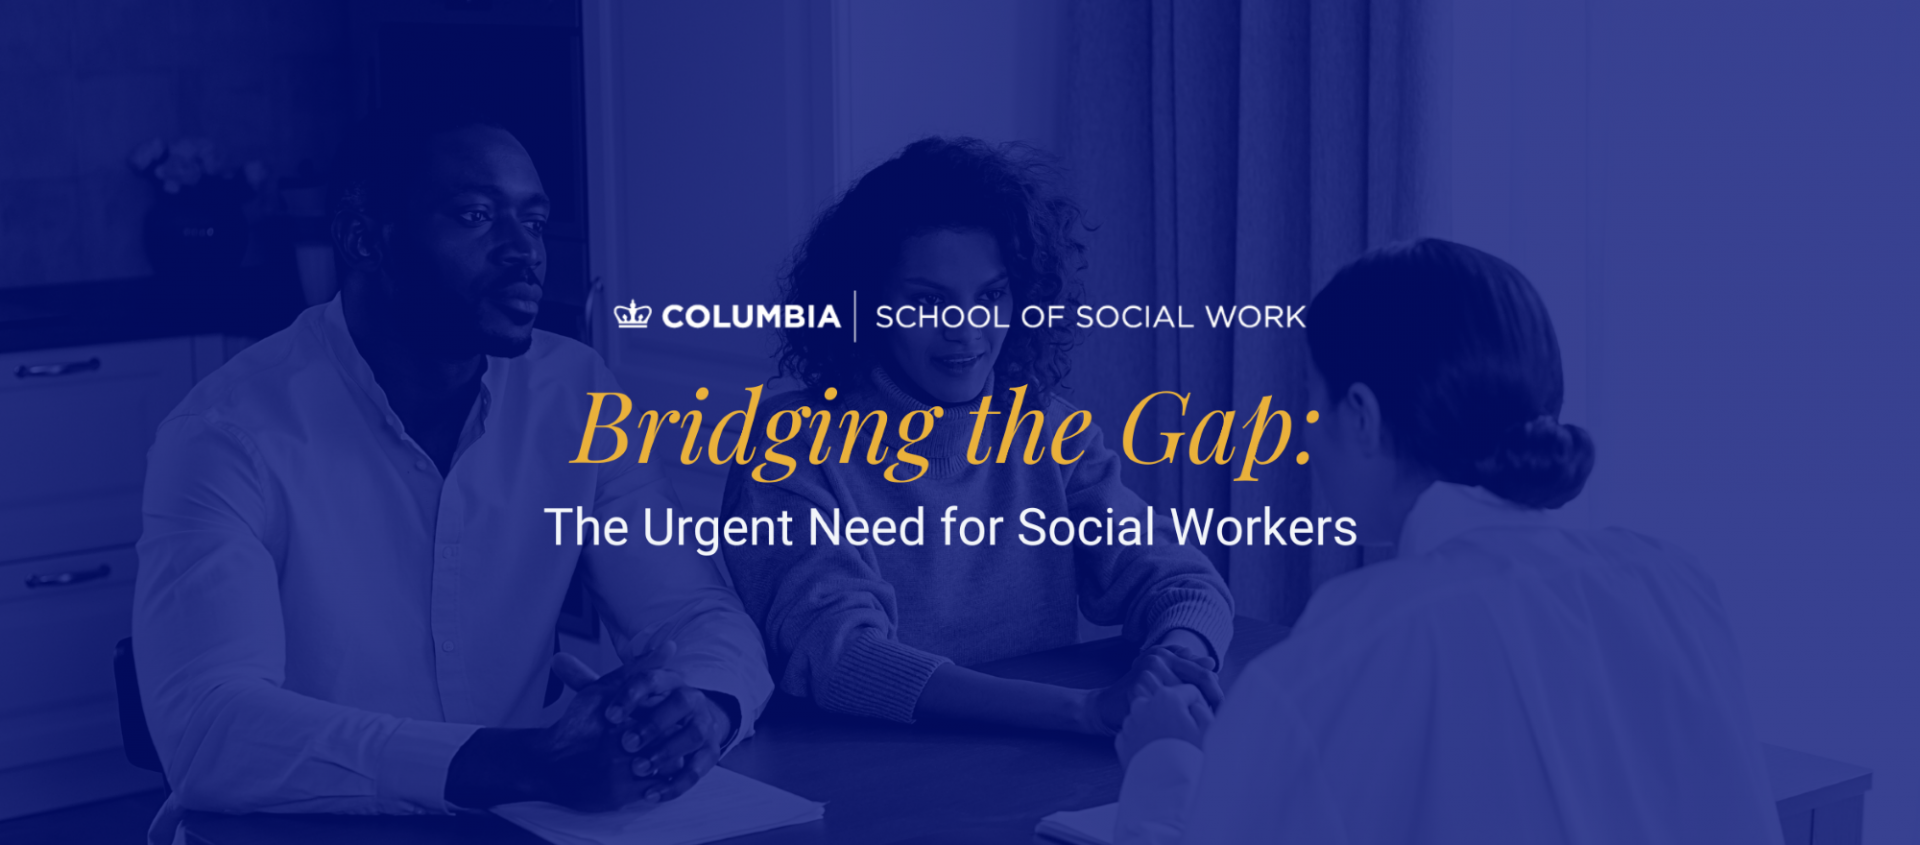 Bridging the Gap: The Urgent Need for Social Workers